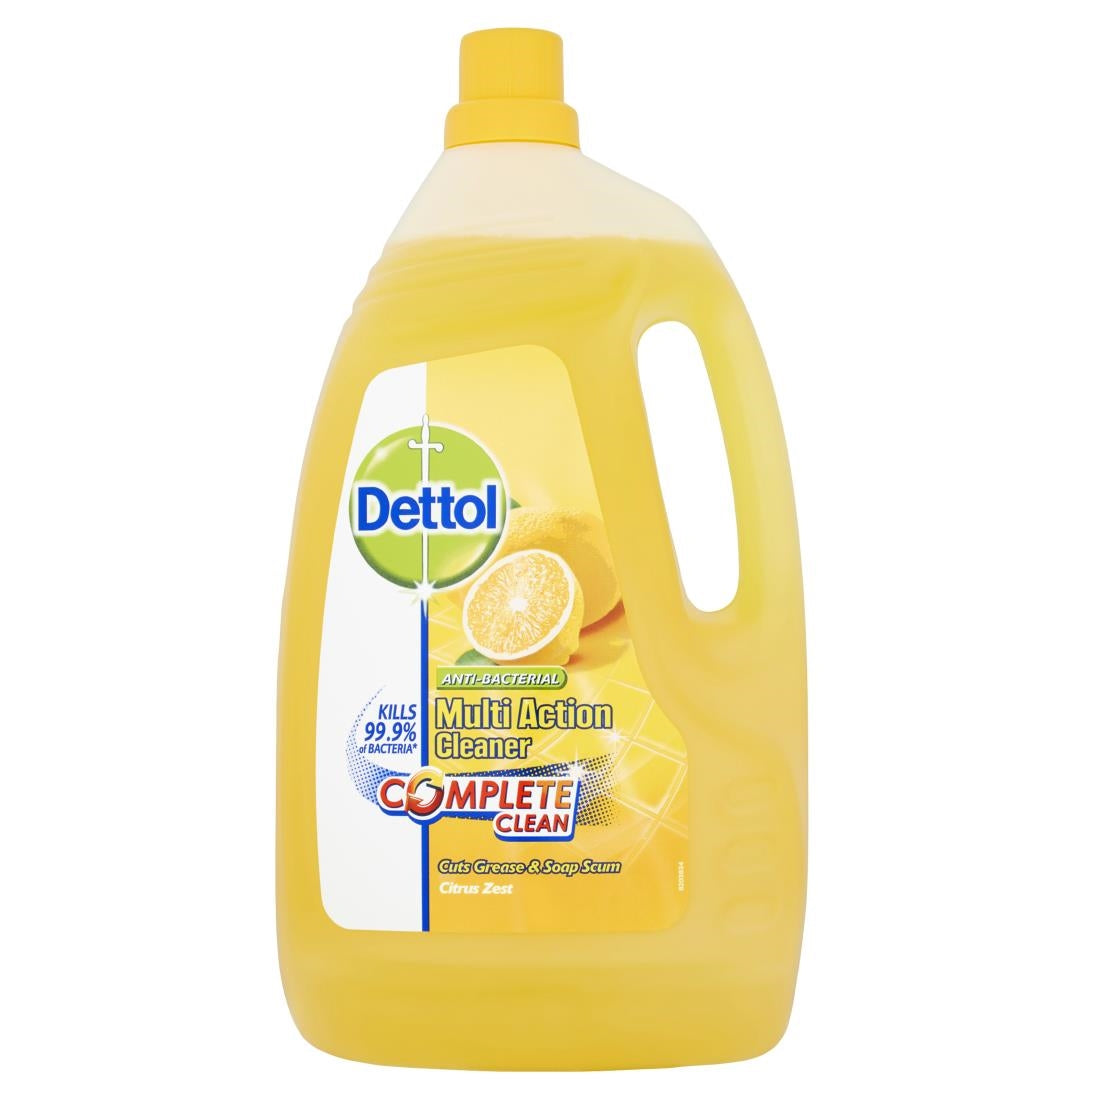 FT370 Dettol Antibacterial Multi-Action Cleaner Concentrate 4Ltr JD Catering Equipment Solutions Ltd